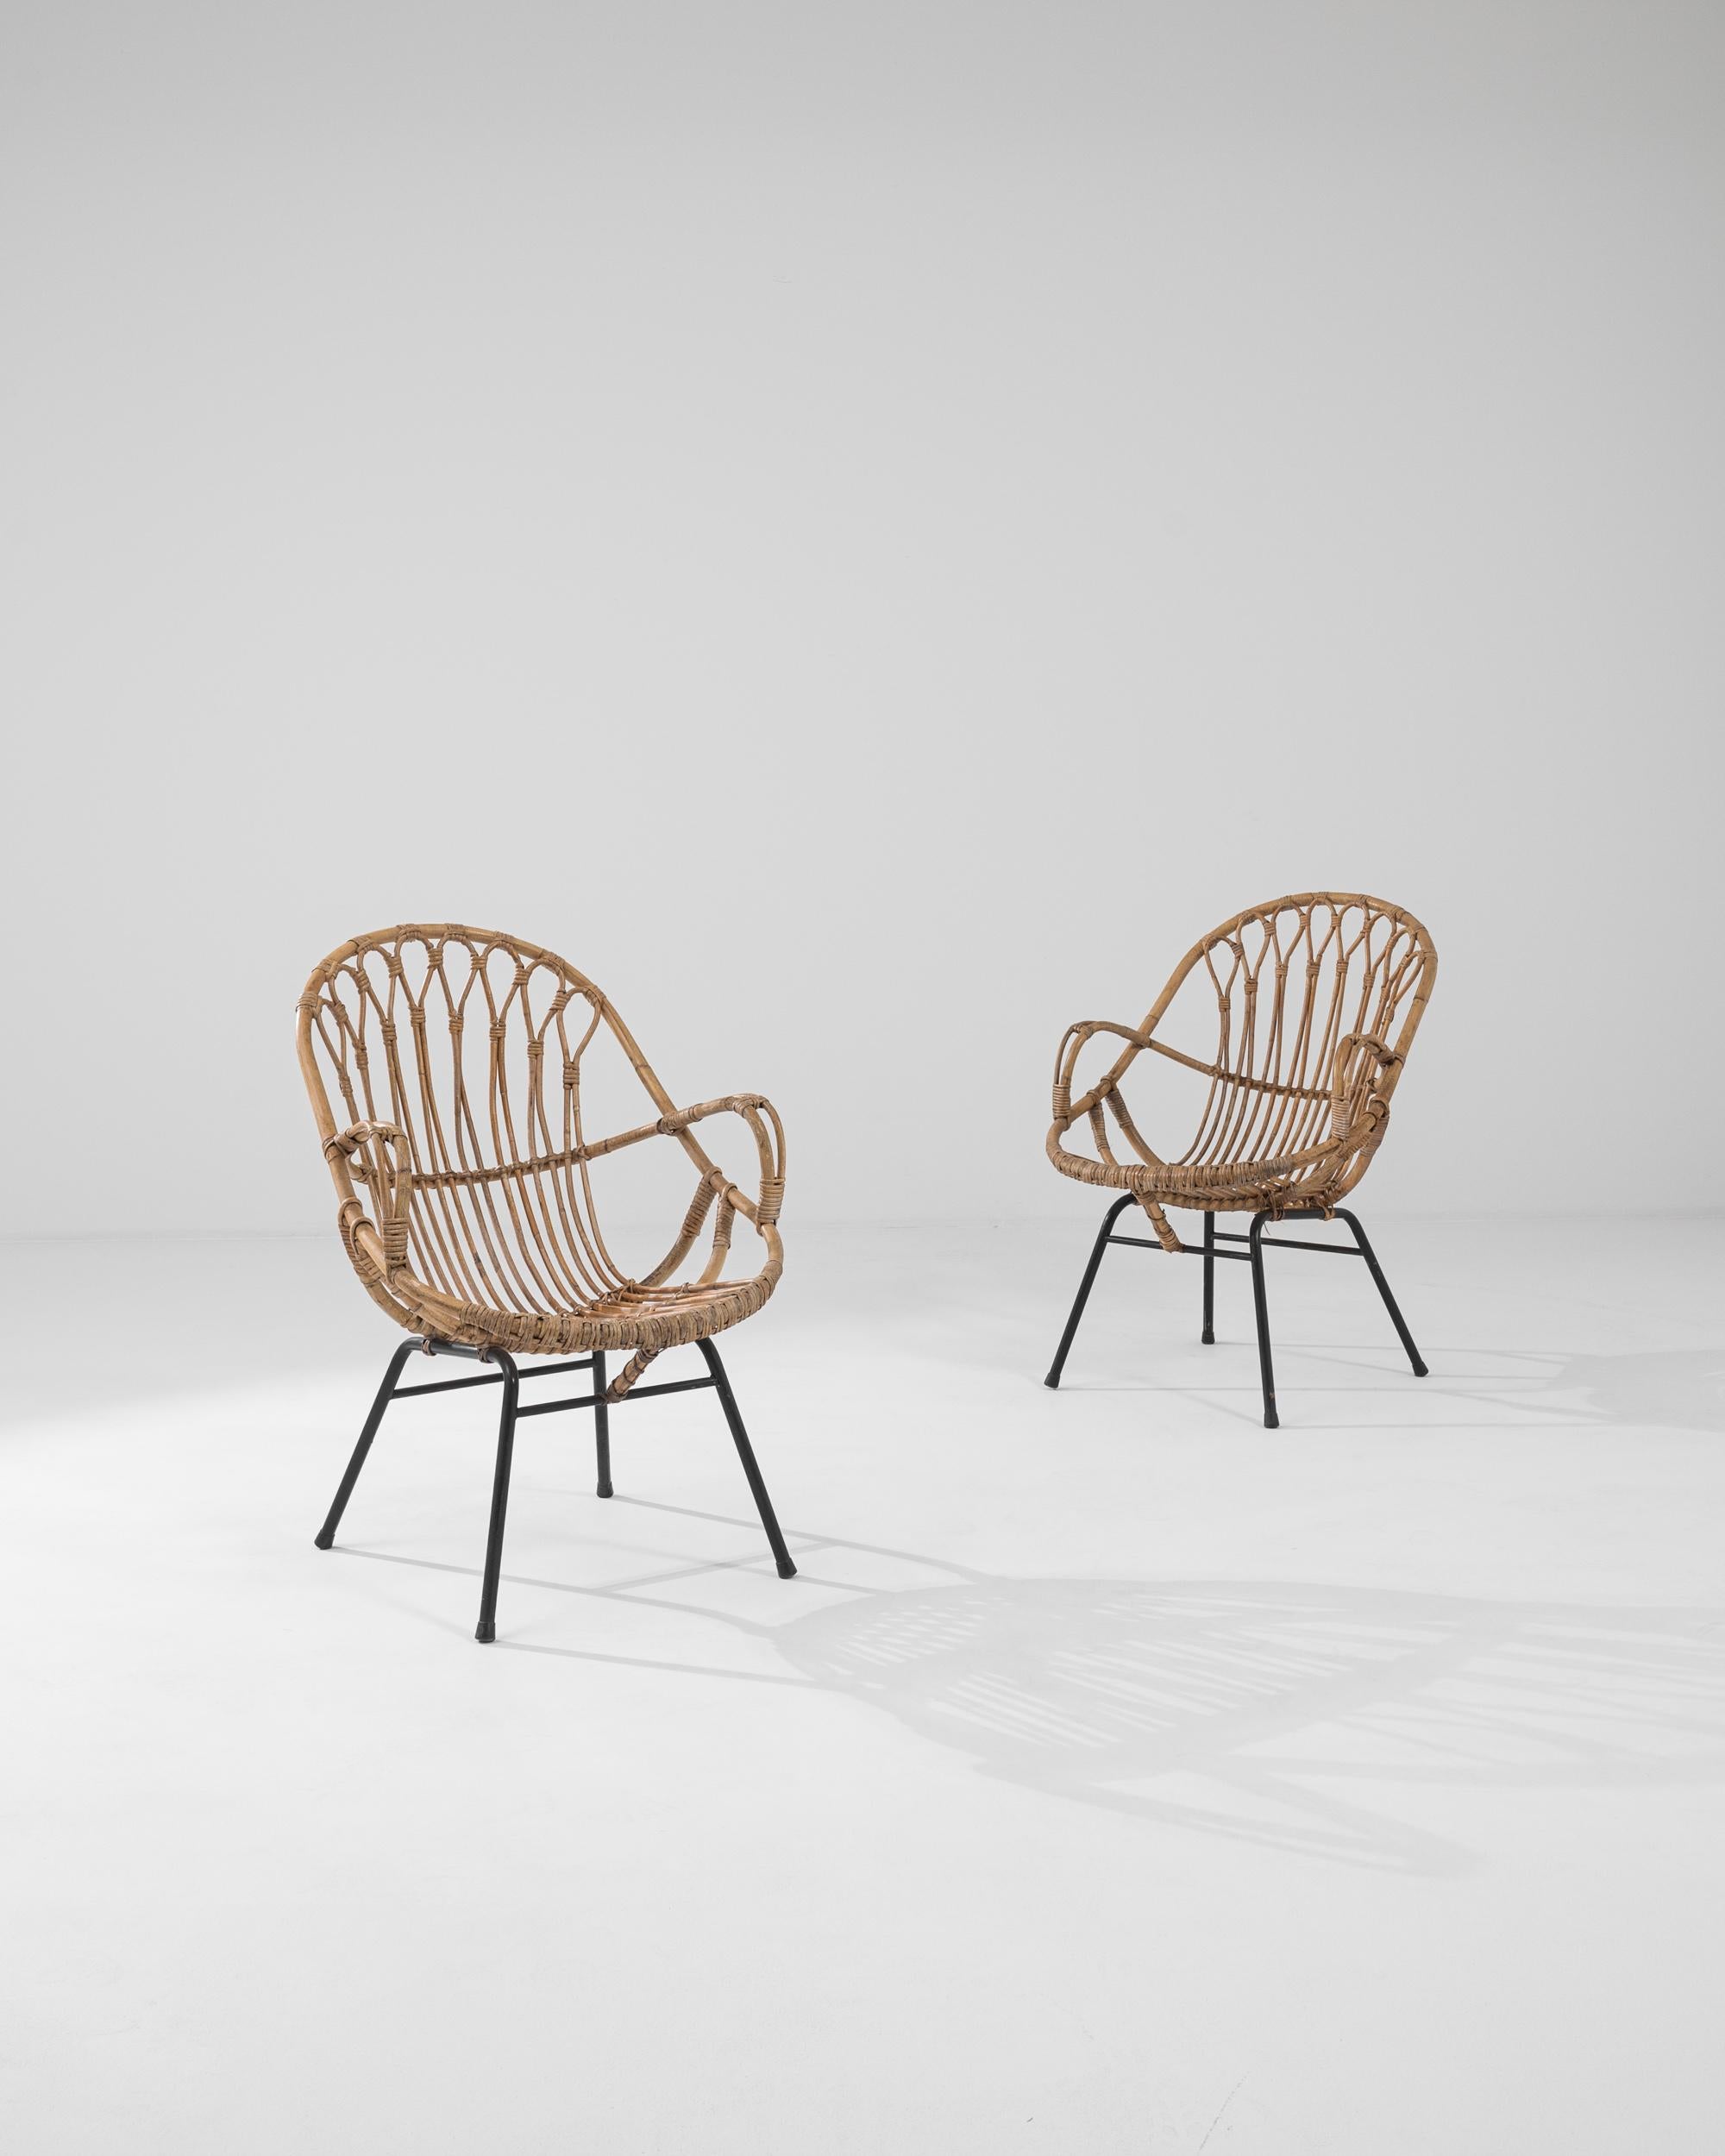 A pair of armchairs from France, circa 1960. These french-made armchairs are a playful twist on a midcentury classic. Using lashed together rattan, artisans have crafted a chair both geometrically pleasing and surprisingly comfortable. Created by